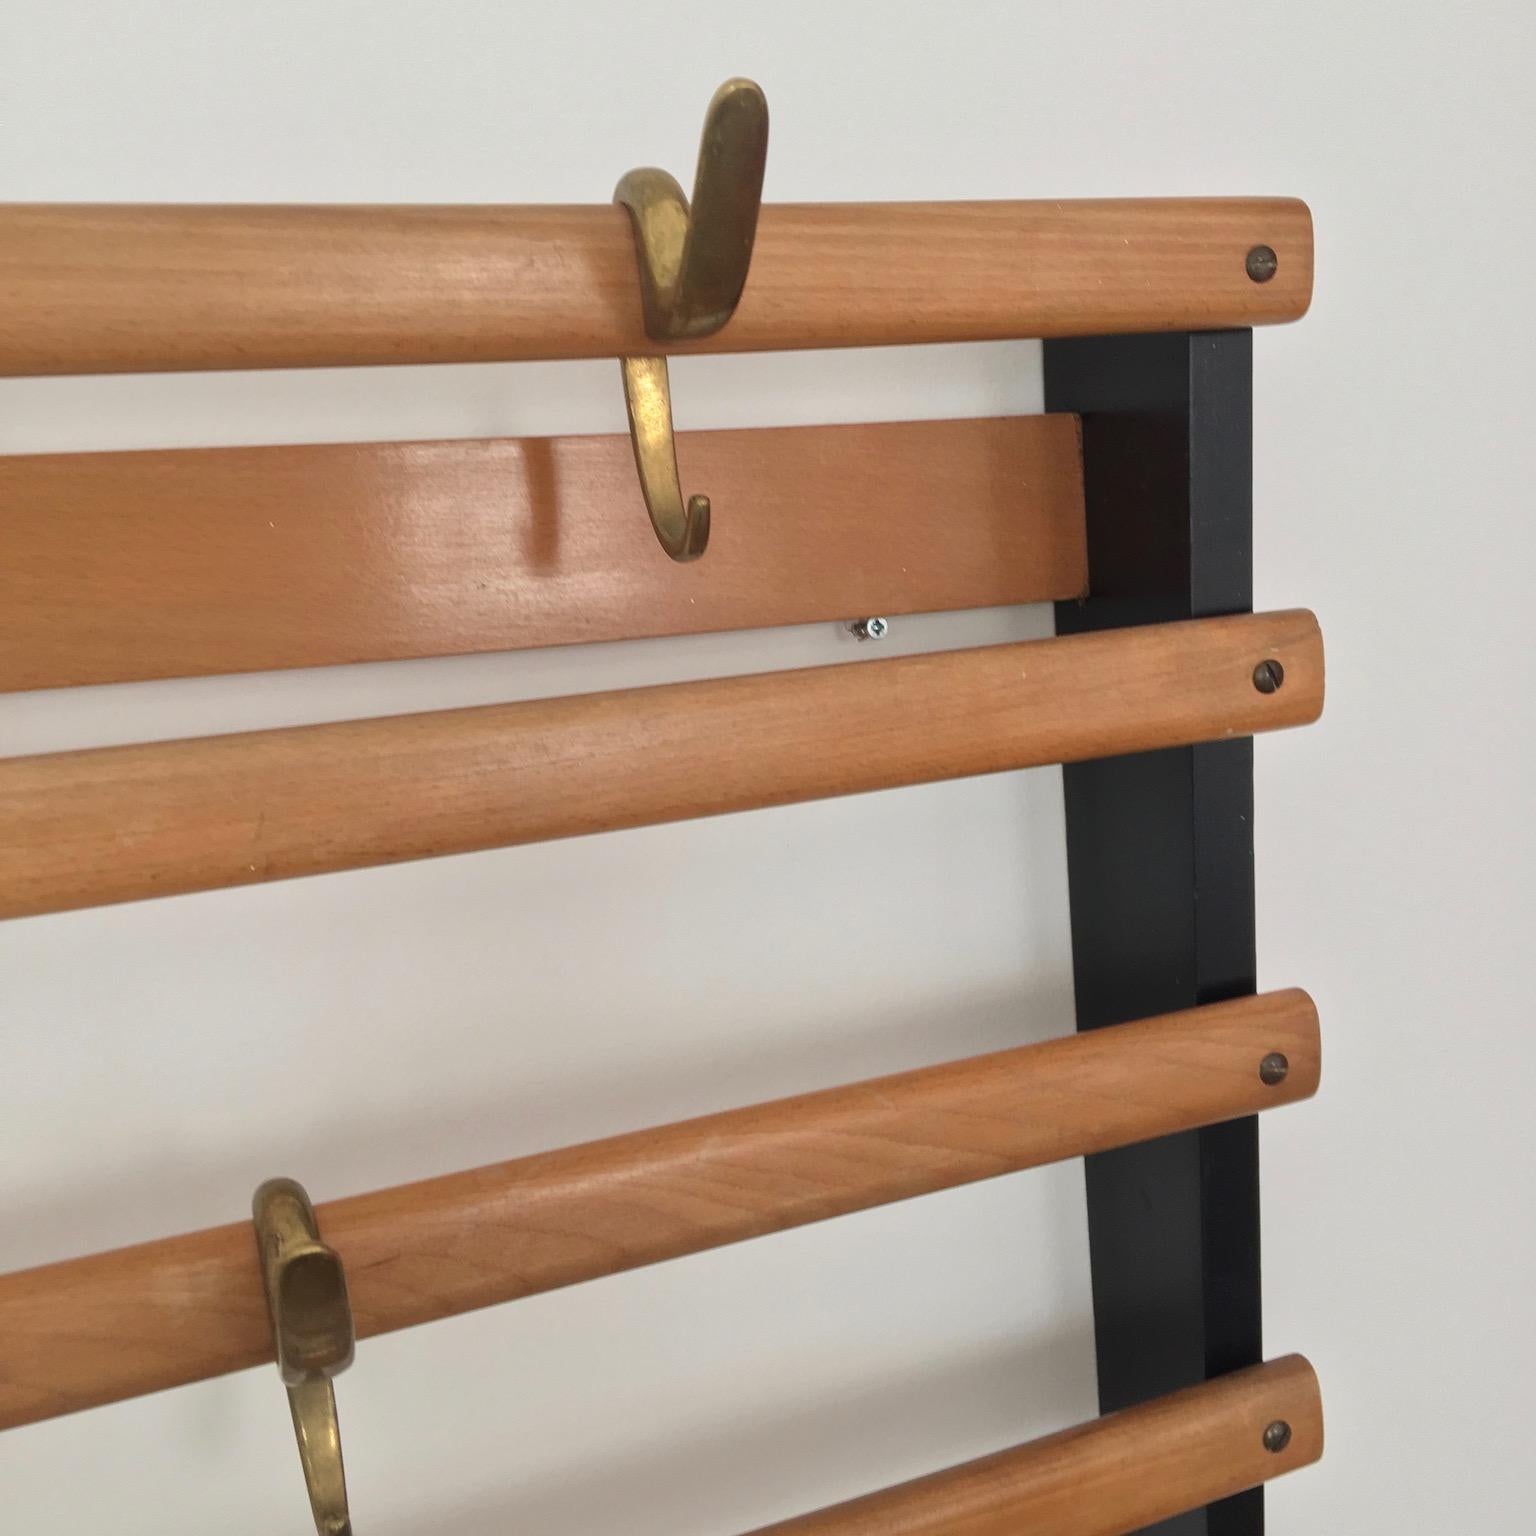 Wall-mounted coat rack by Carl Auböck, Vienna circa 1950 made of beechwood. The sides are lacquered black and slats colorless. Also comes with nine brass hooks. This original piece has a good vintage patina and condition.
Measures: 120 cm